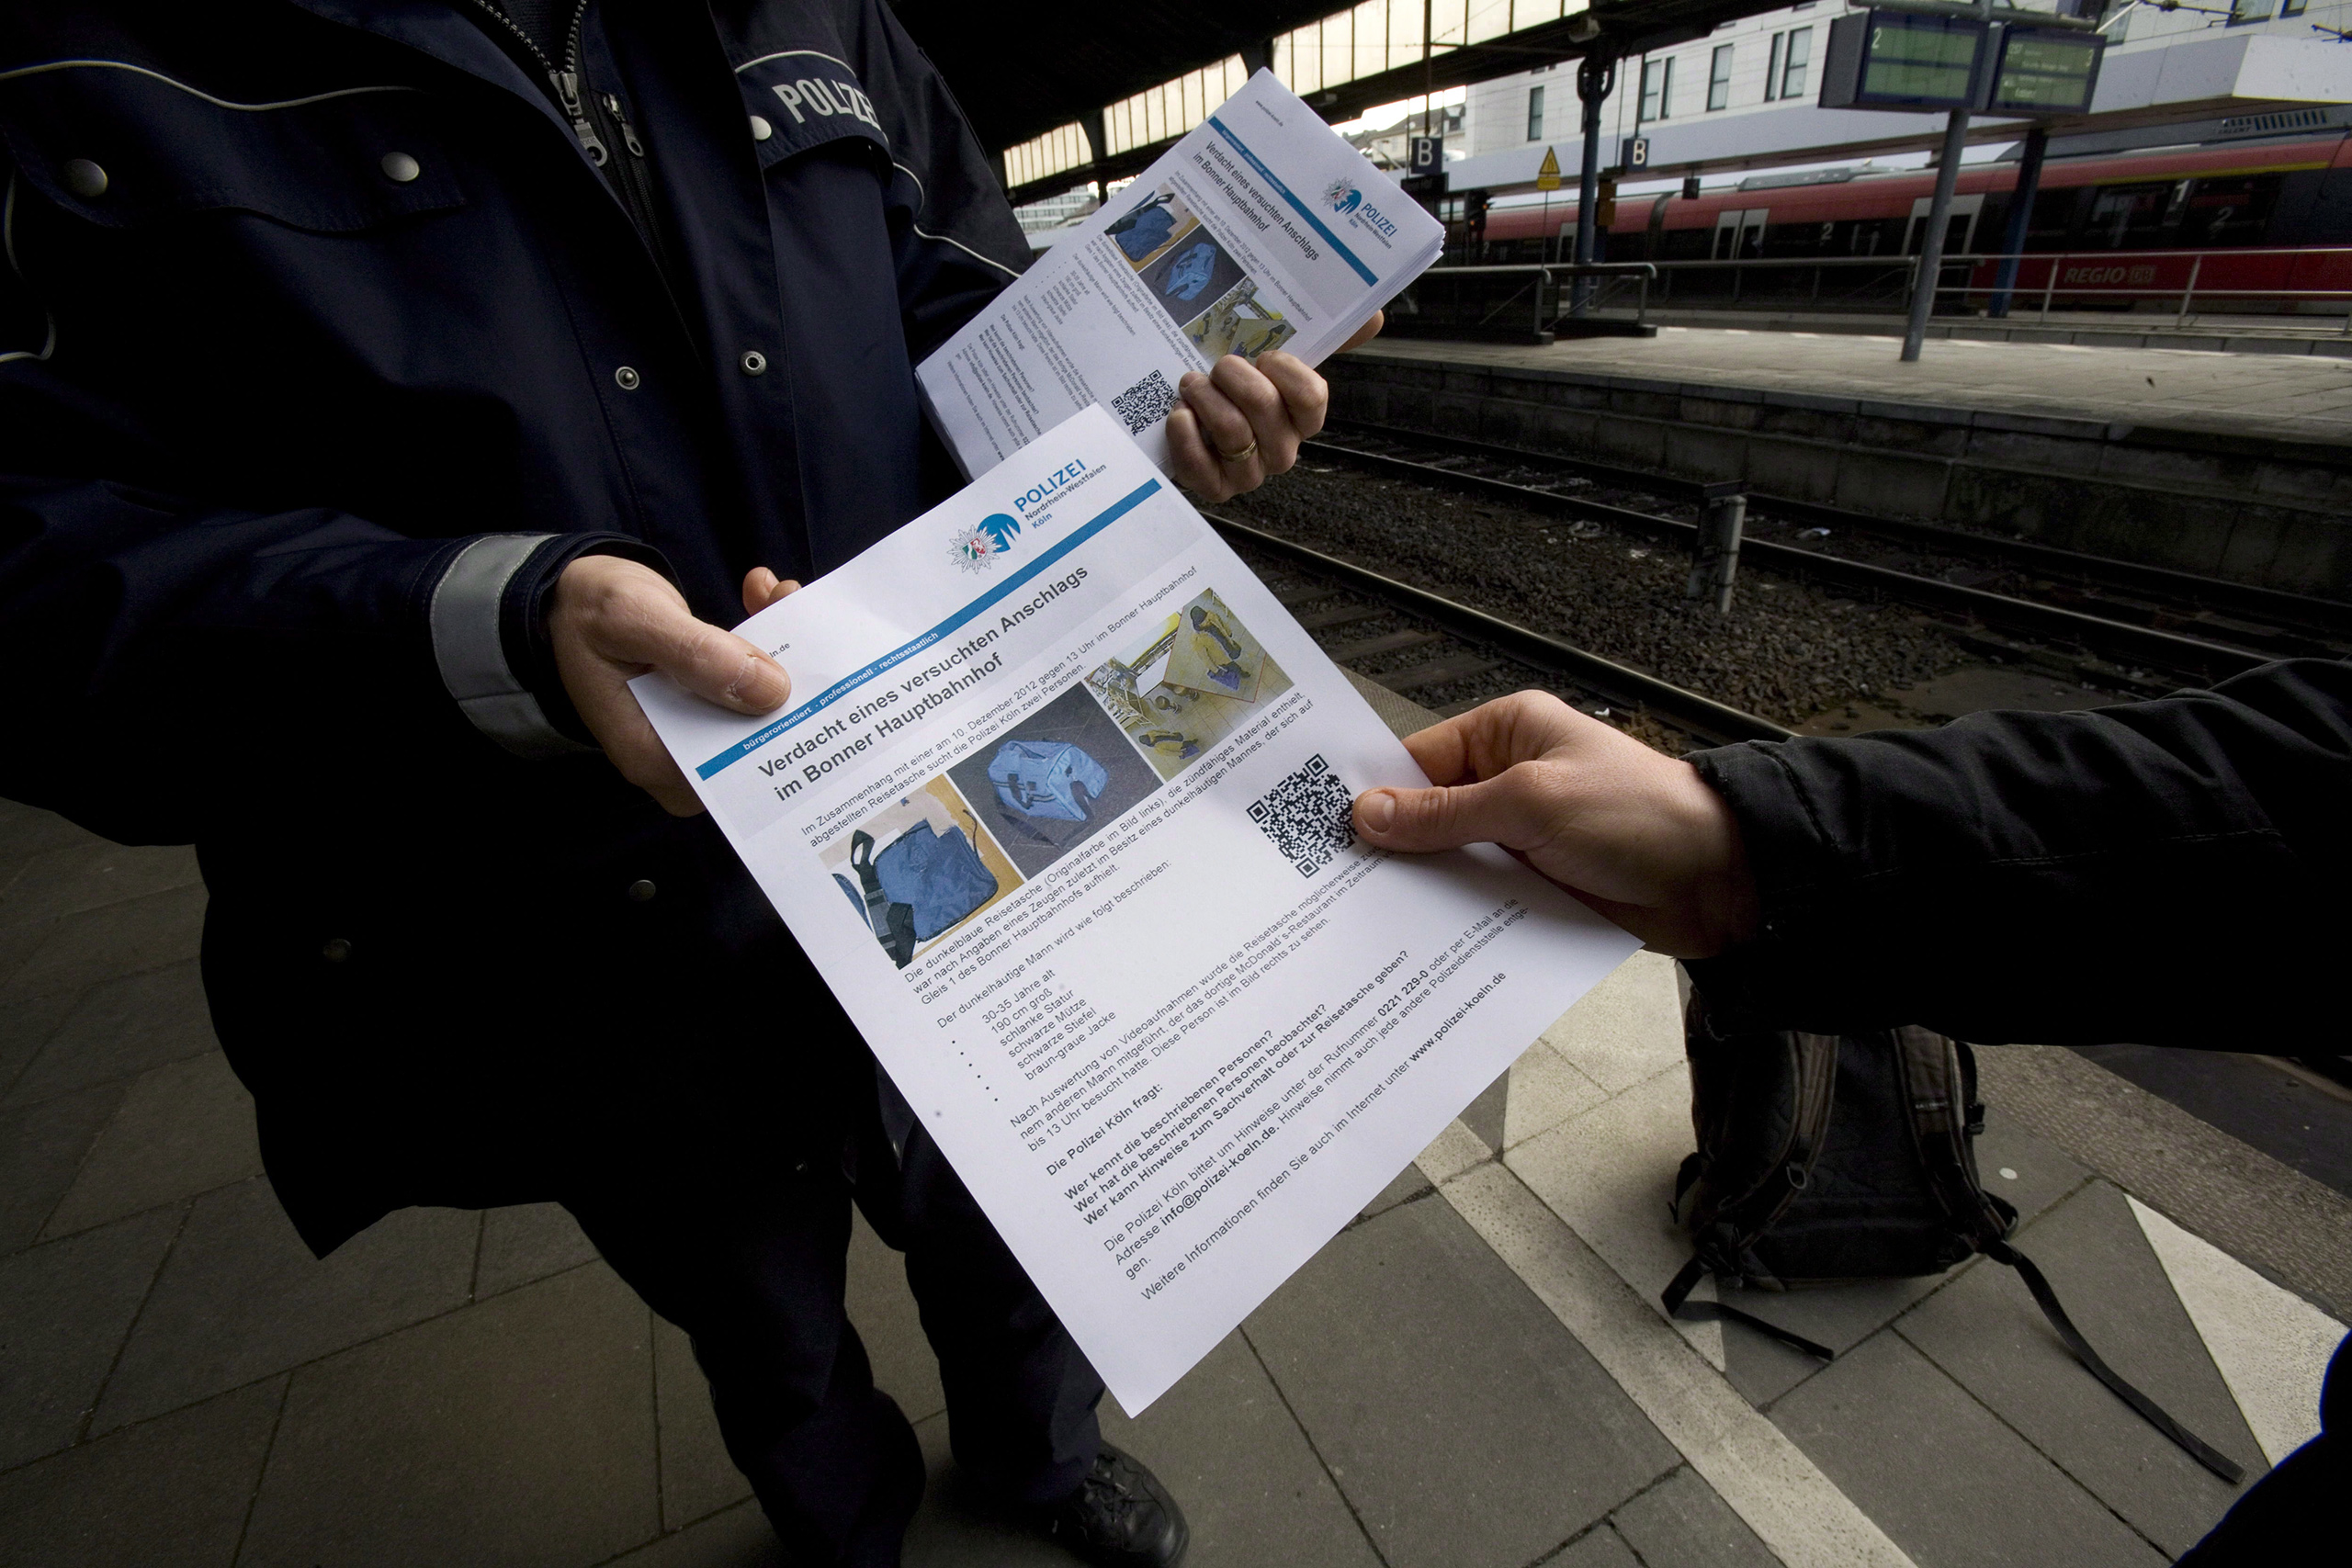 A poster released by the police shows the suspect of an attempted bomb attack at the central train station in Bonn, Germany, Dec. 13, 2012. (Ulrich Baumgarten—Getty Images)